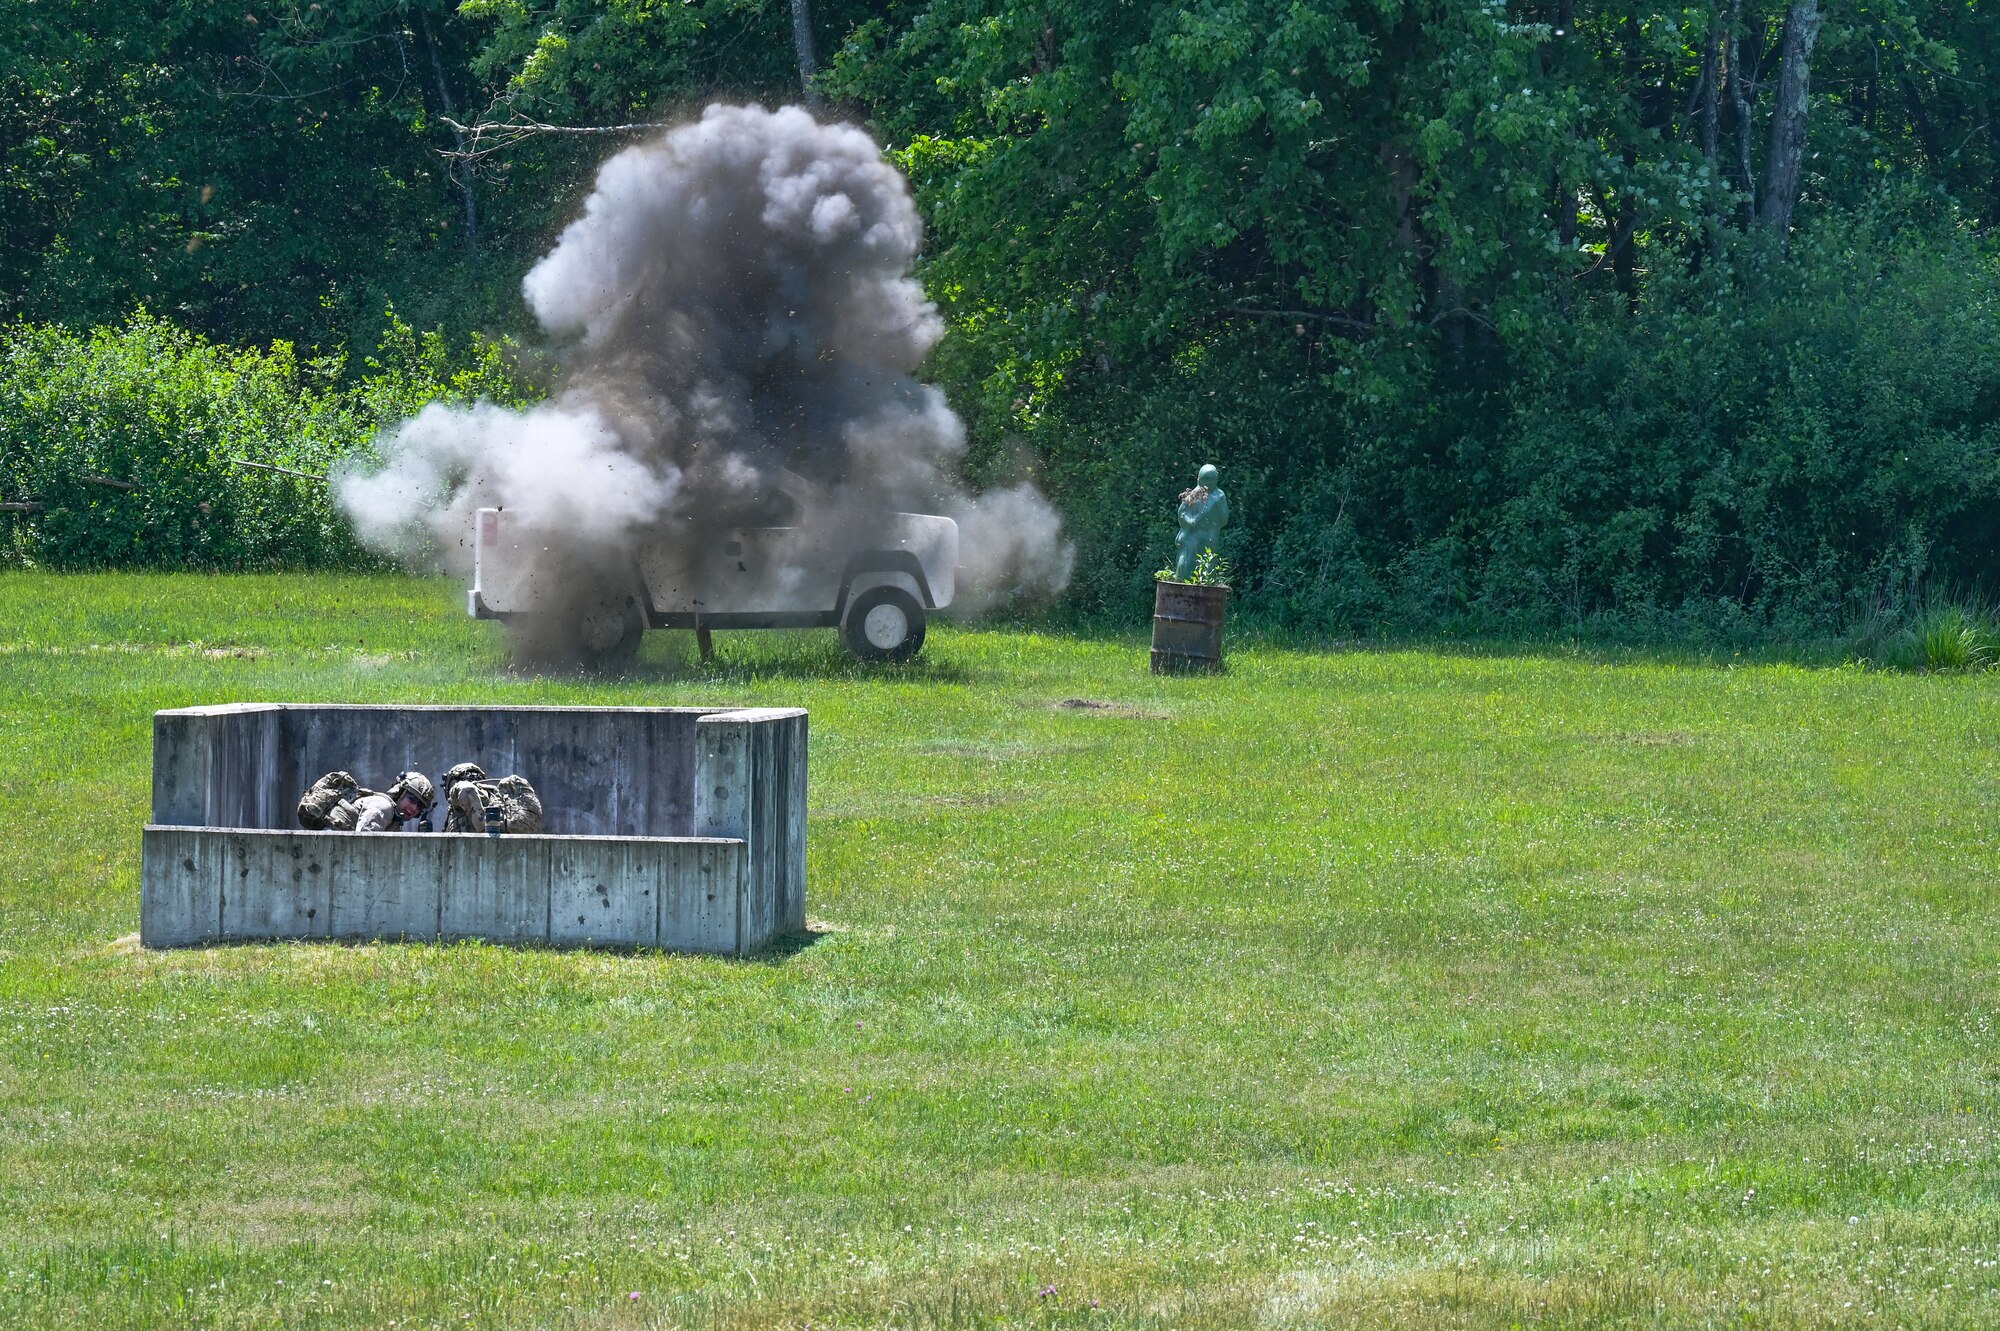 Tech. Sgt. Anthony McDaniel, an Integrated Defense Leadership Course cadre member assigned to the 914th Security Forces Squadron, Niagara Falls Air Reserve Station, New York, gives a thumbs up during the detonation of a live grenade on May 31, 2023, at Camp James A. Garfield Joint Military Training Center, Ohio.